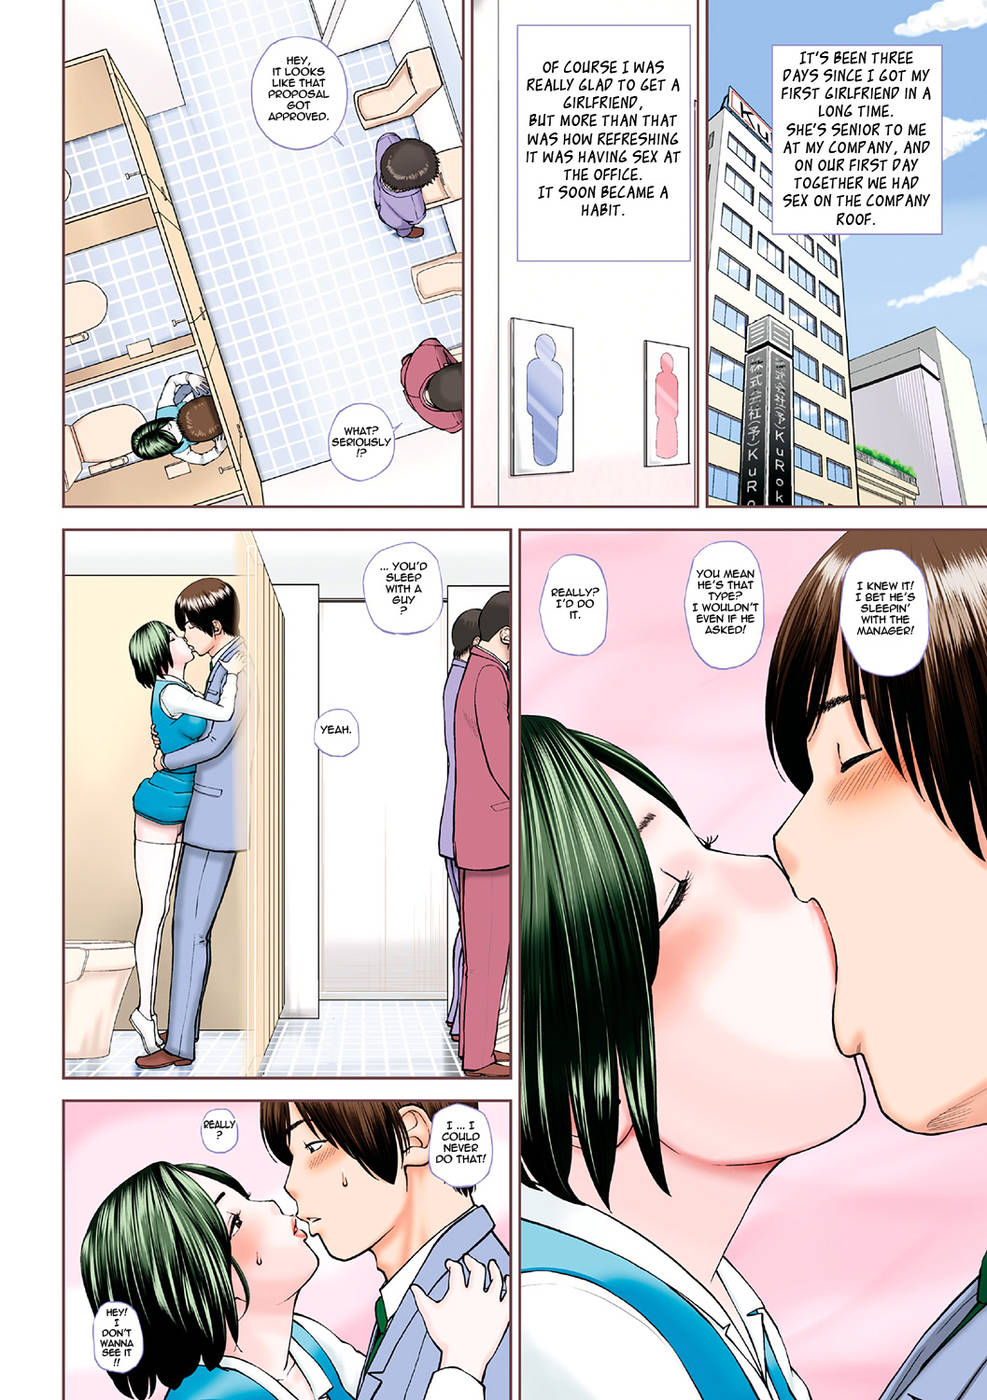 Hentai Manga Comic-34 Year Old Unsatisfied Wife-Chapter 10-Uniforms Office Lady-Second Half-2